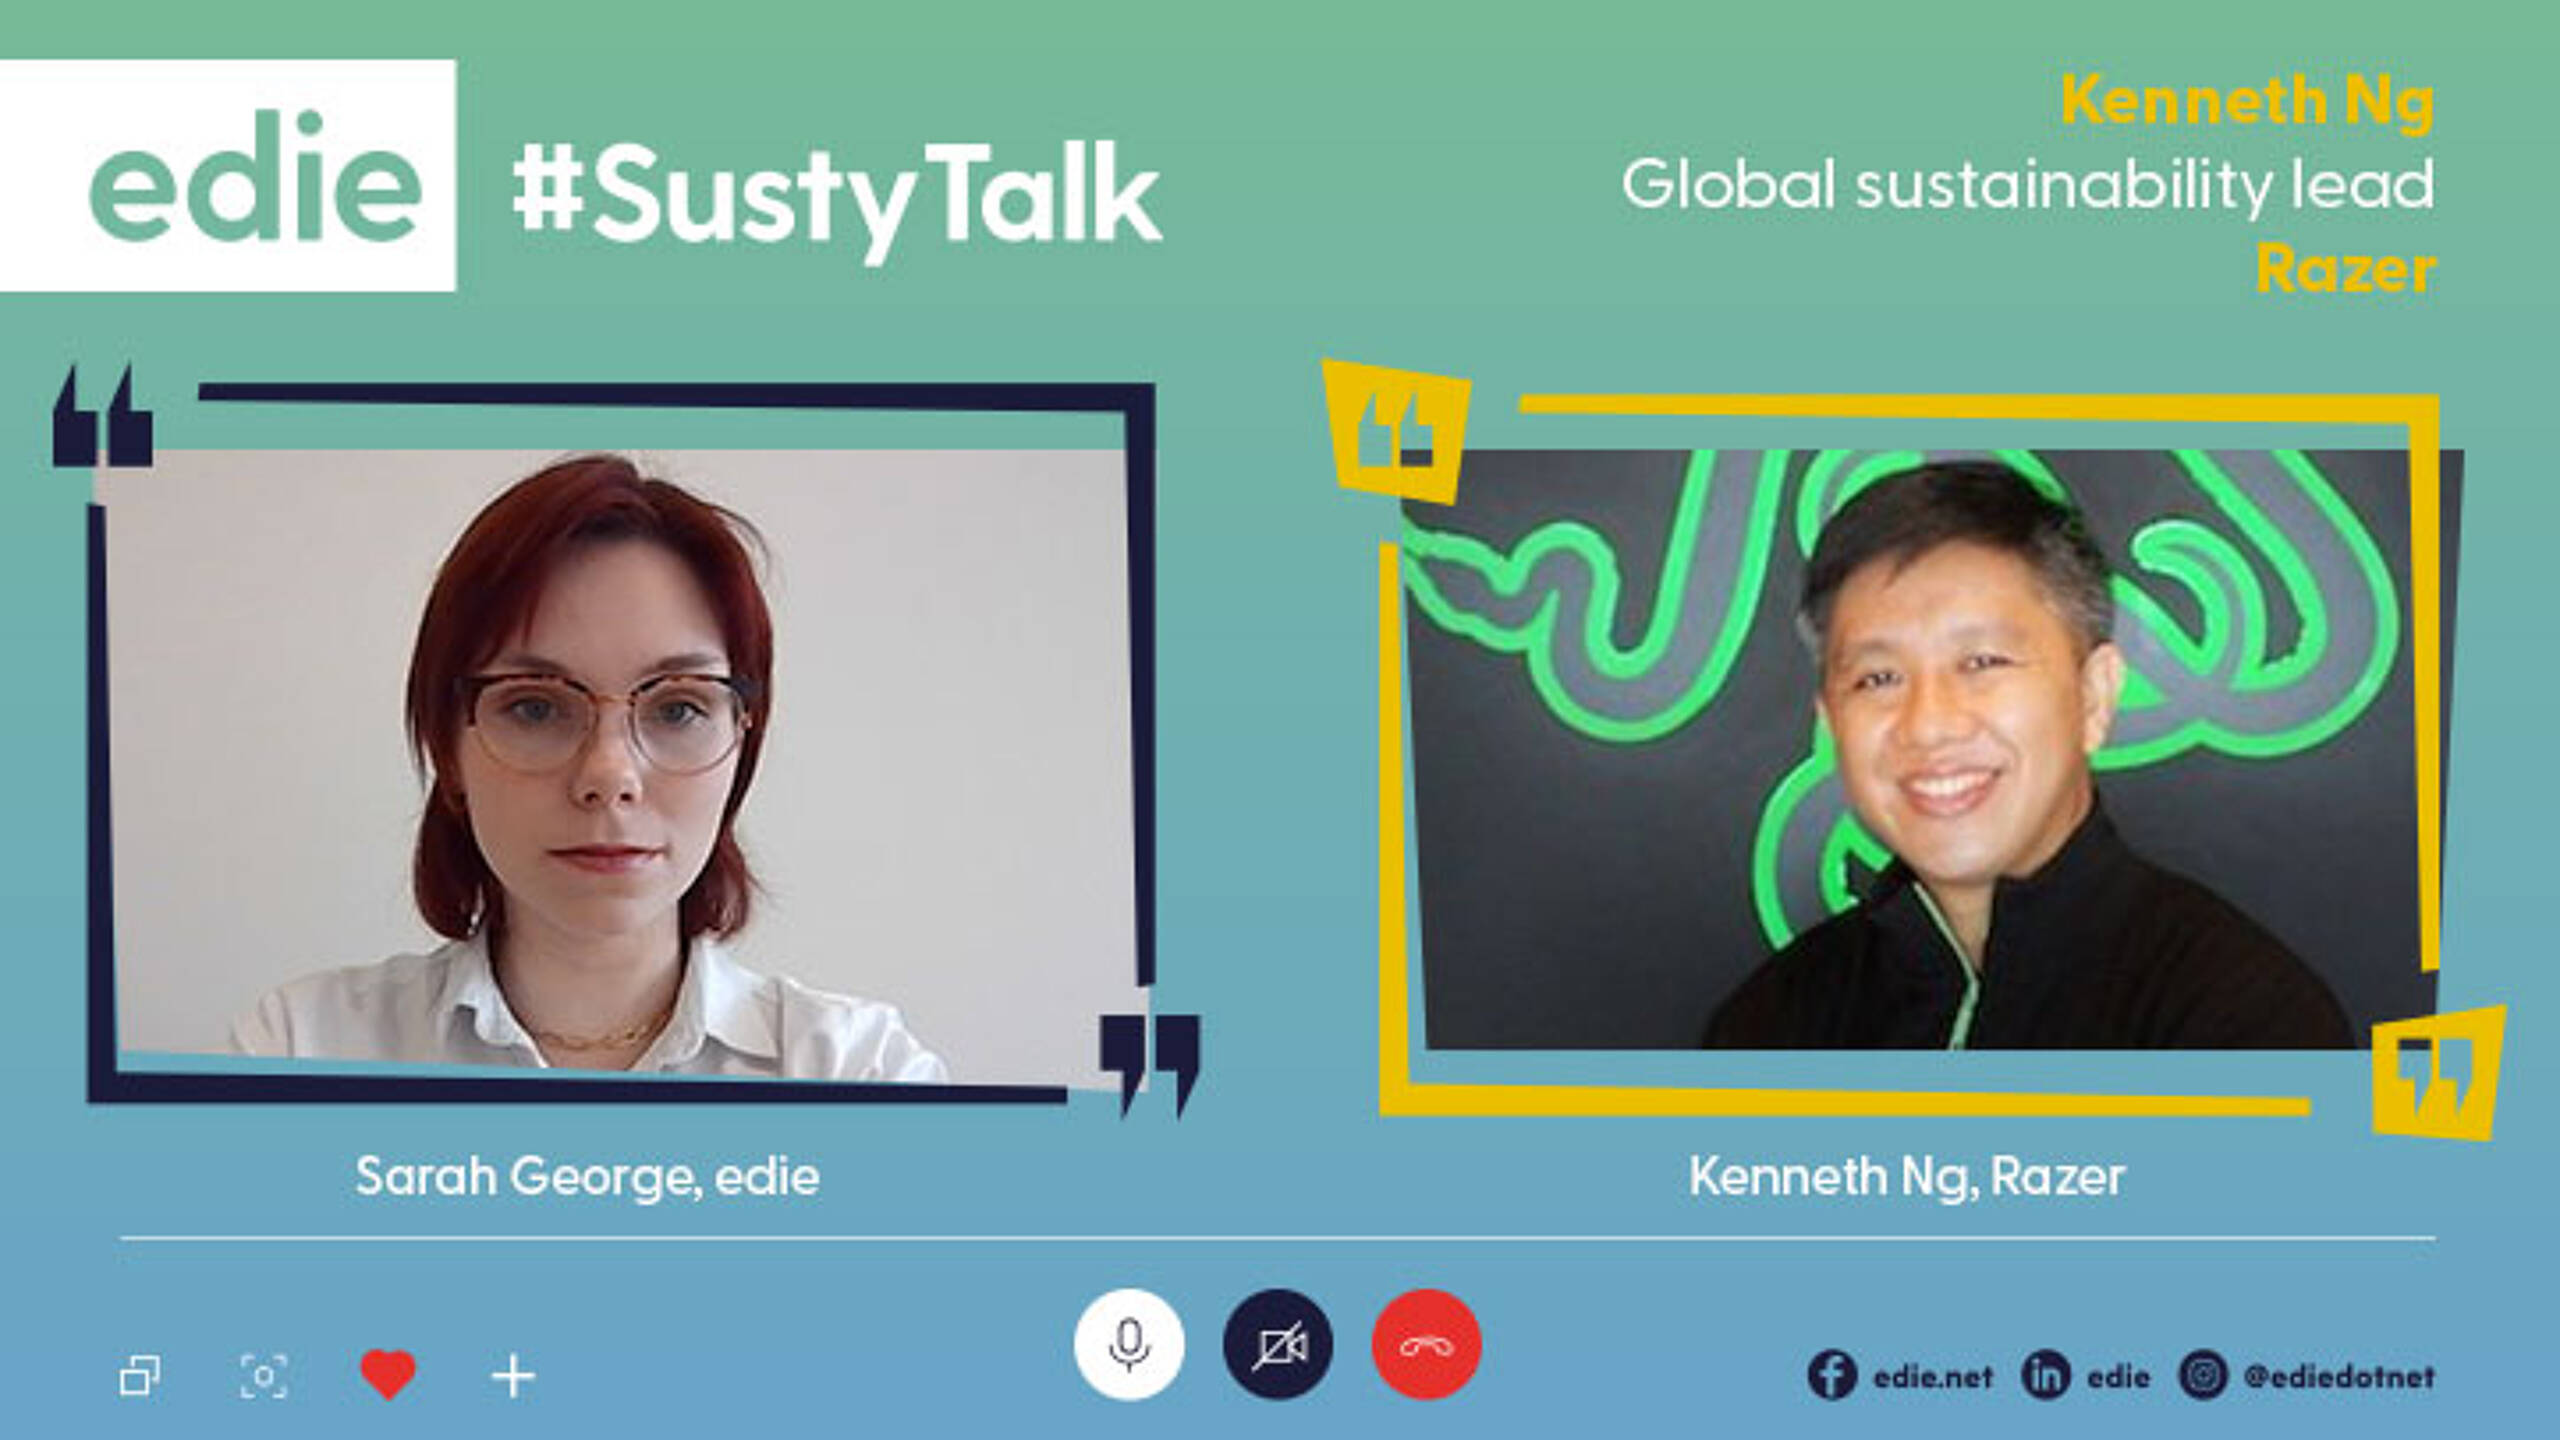 #SustyTalk: Razer’s Kenneth Ng on embedding the UN SDGs into business strategy